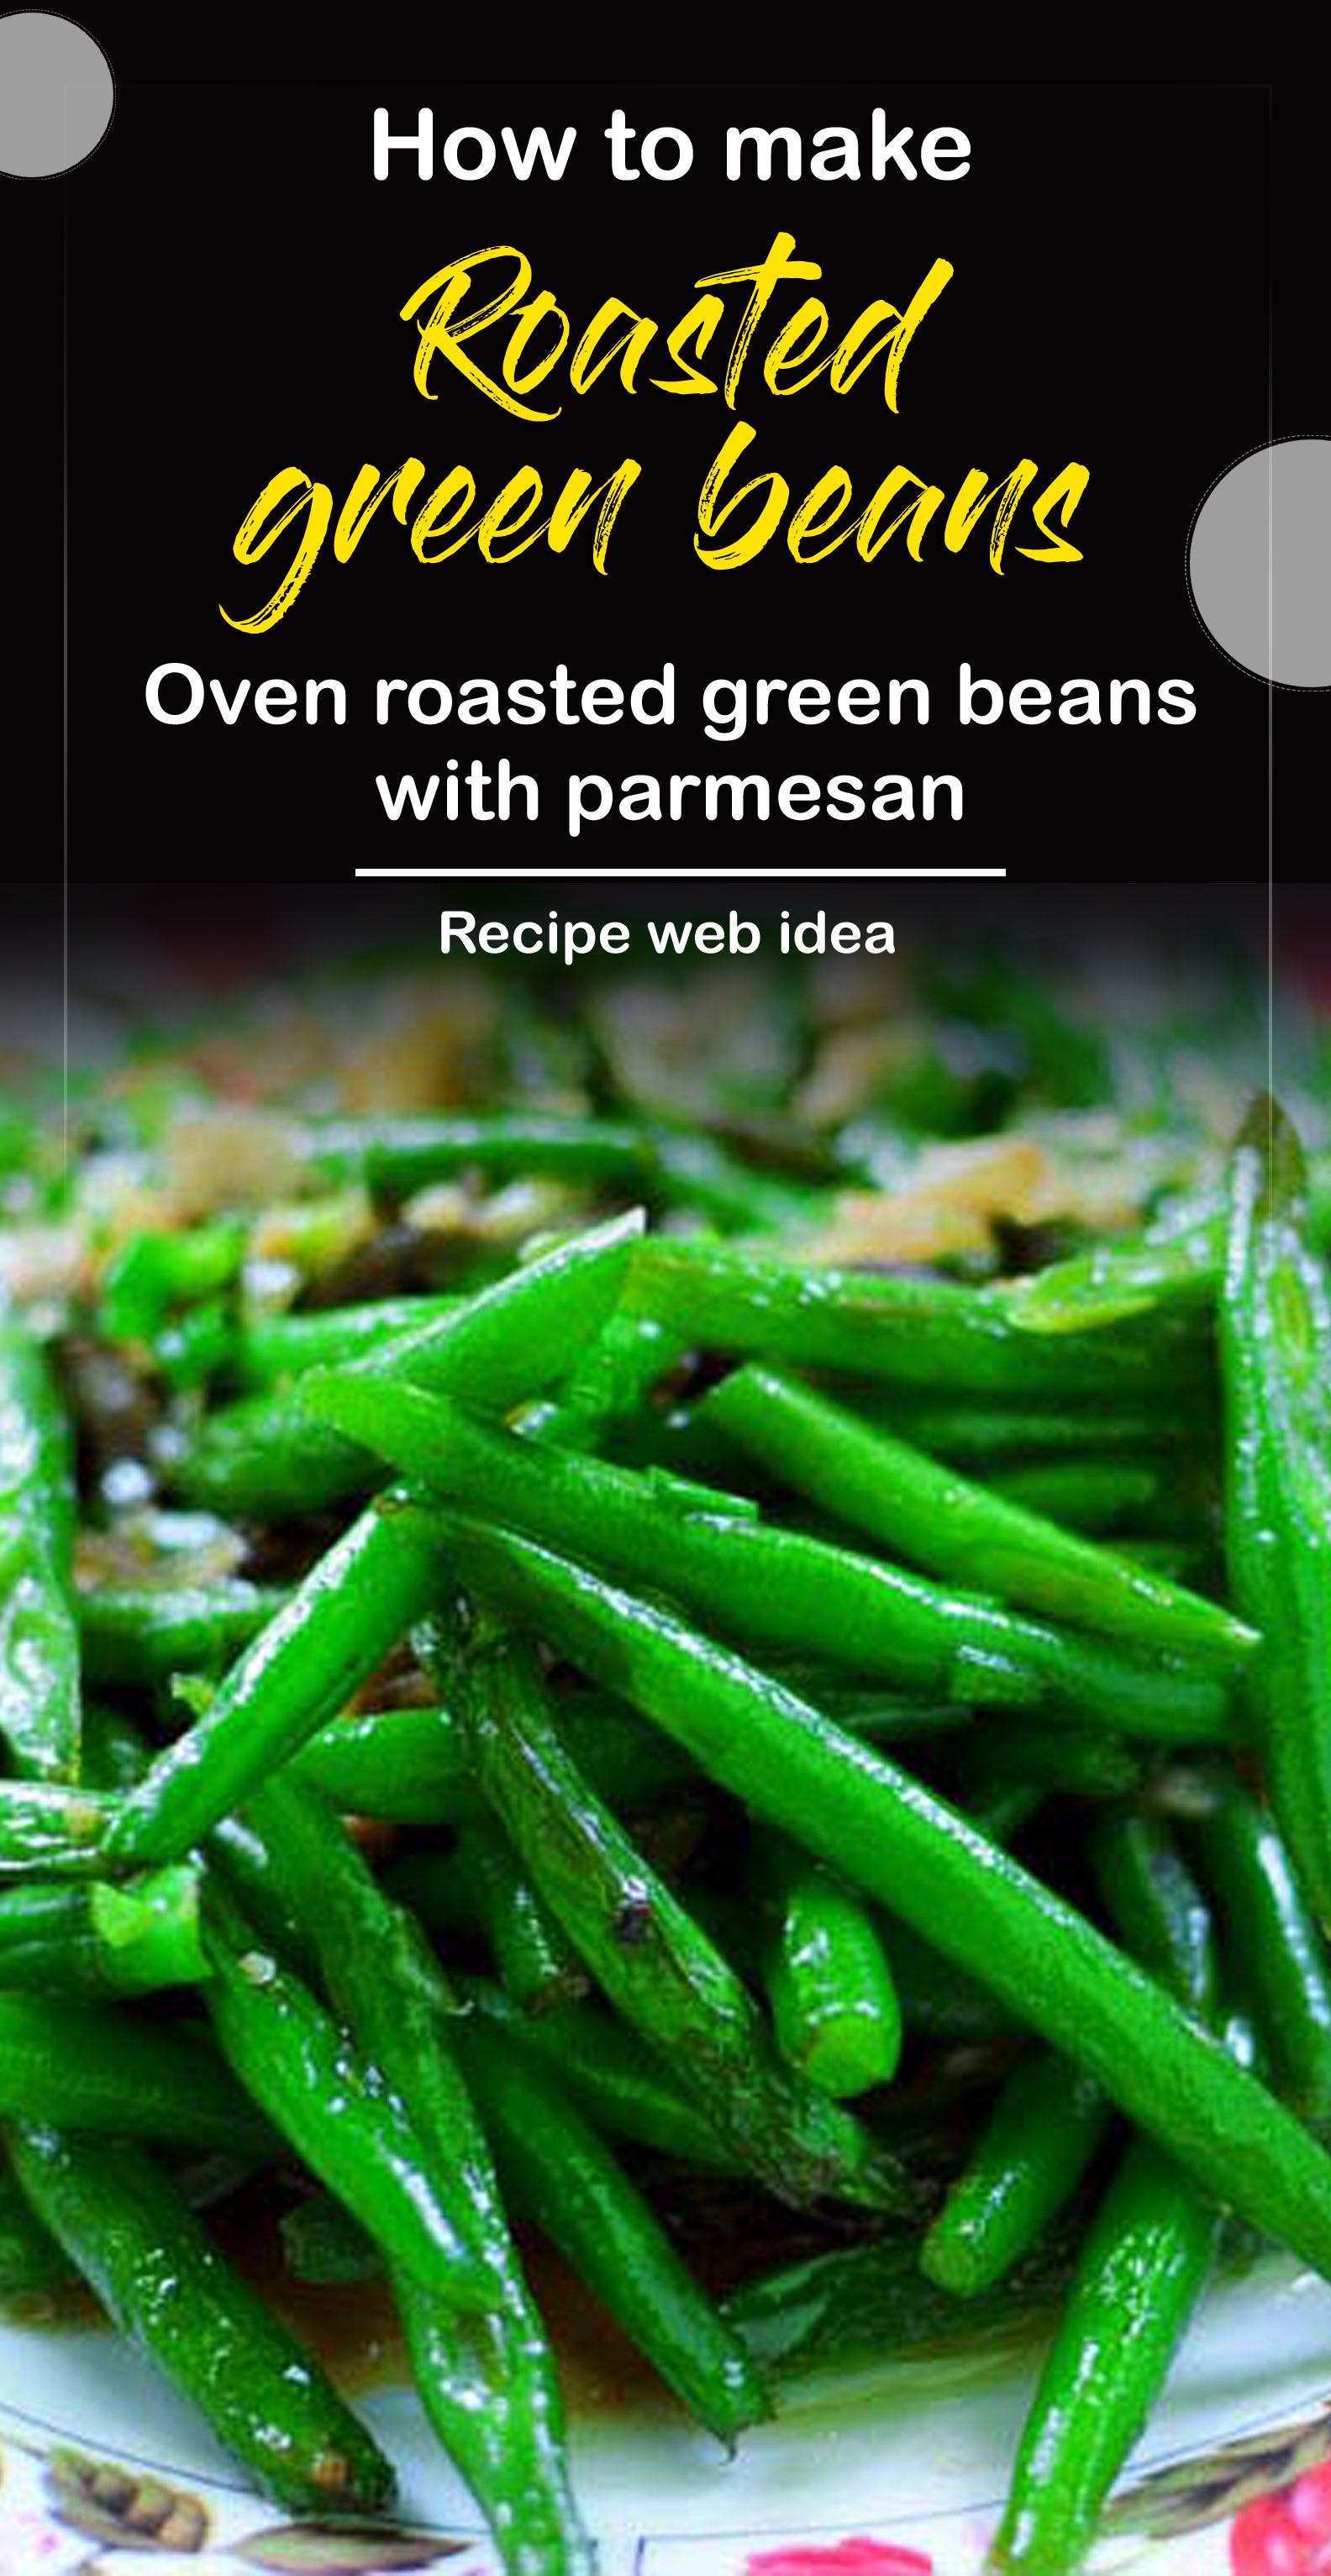 Roasted green beans recipe | Oven roasted green beans